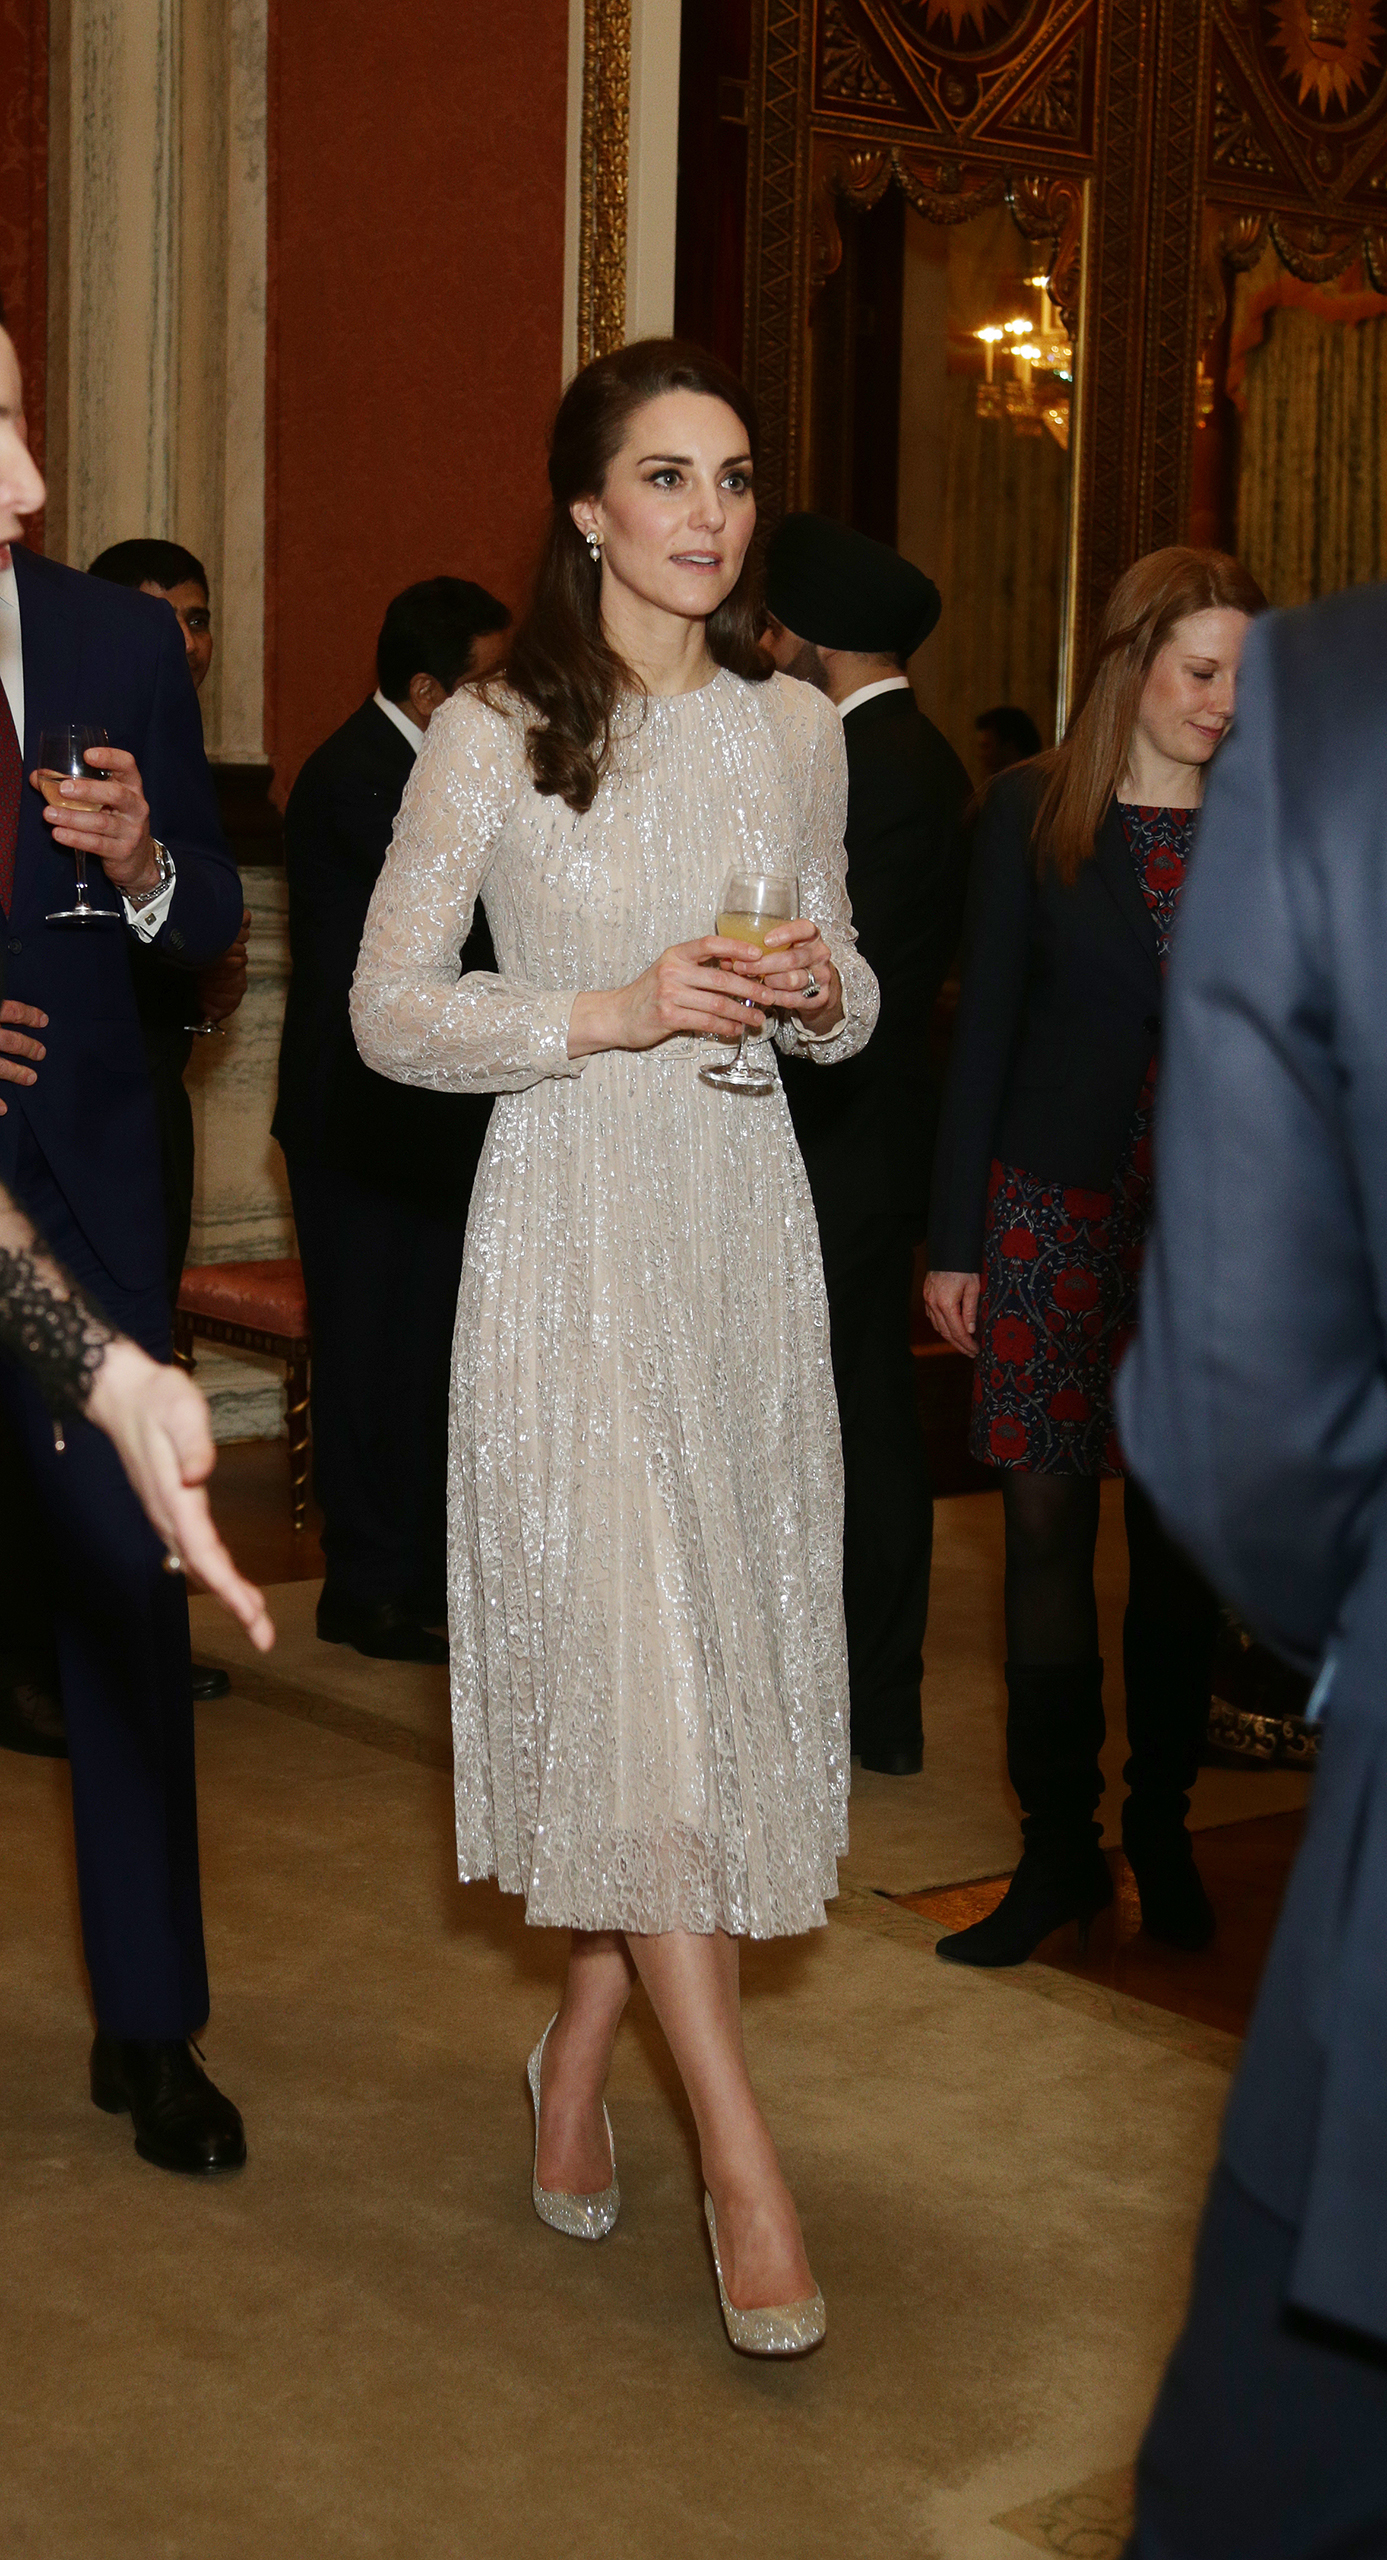 Catherine, Duchess of Cambridge, attends a reception to mark the launch of the U.K.-India Year of Culture 2017 in London on Feb. 27, 2017.